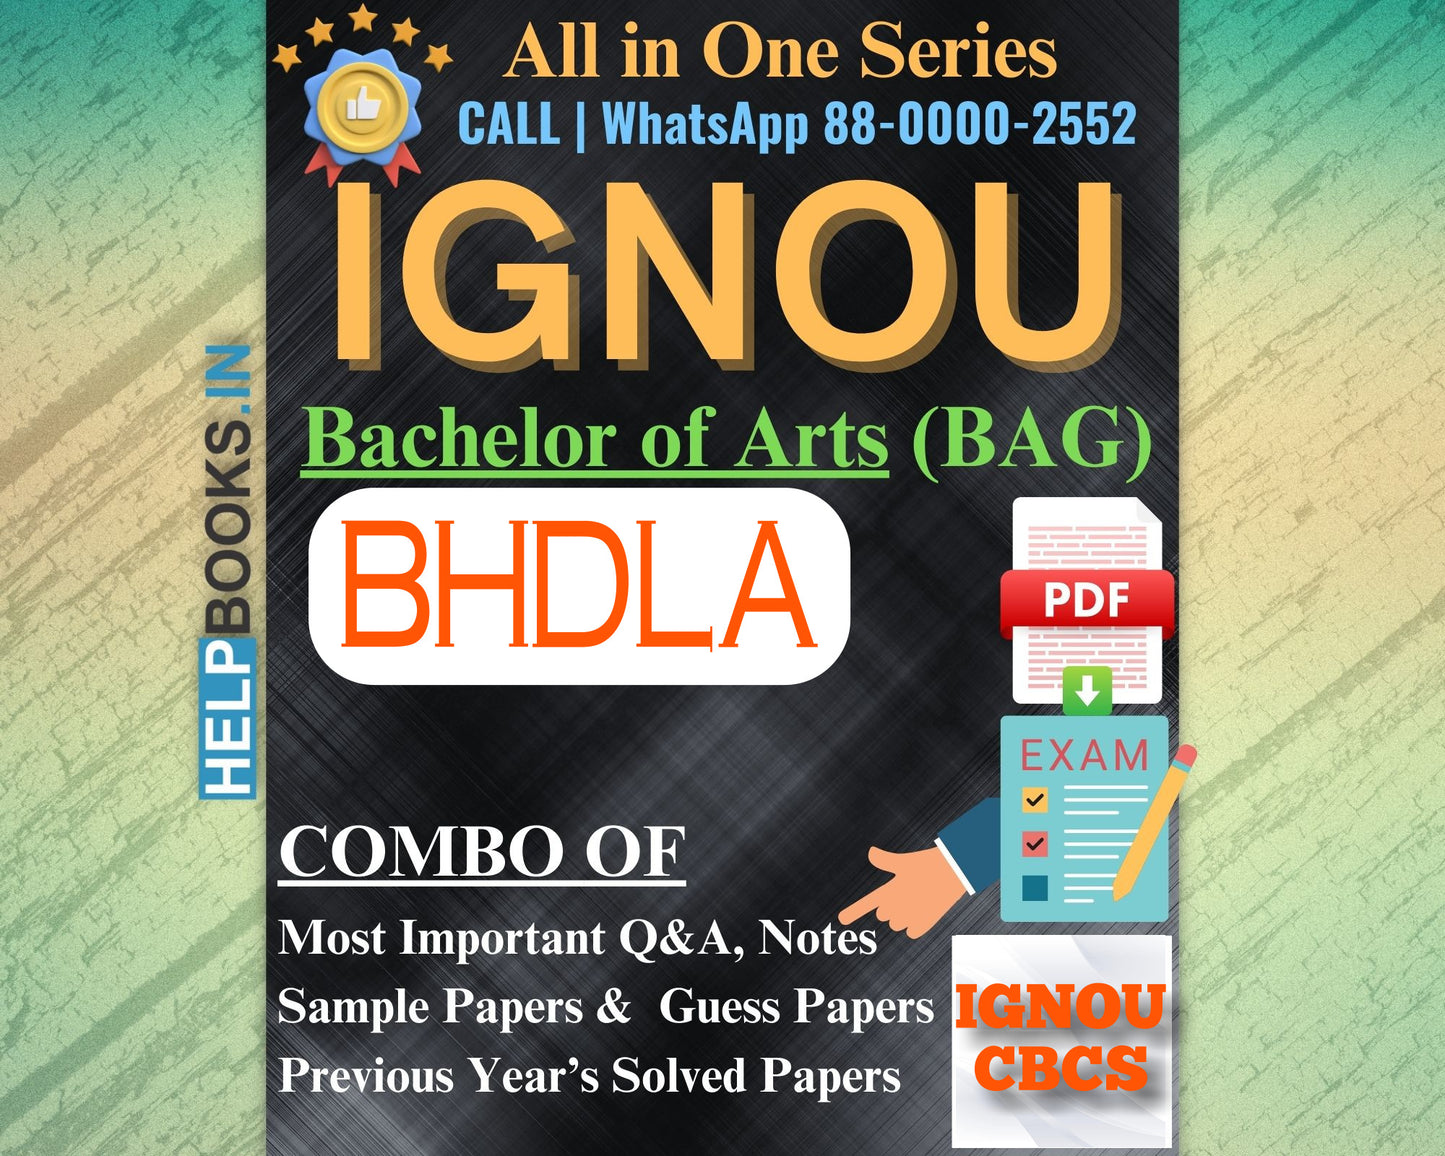 IGNOU BAG Online Study Package: Bachelor of Arts (BA) - Previous Year’s Solved Papers, Q&A, Exam Notes, Sample Papers, Guess Papers-BHDLA135, BHDLA136, BHDLA137, BHDLA138